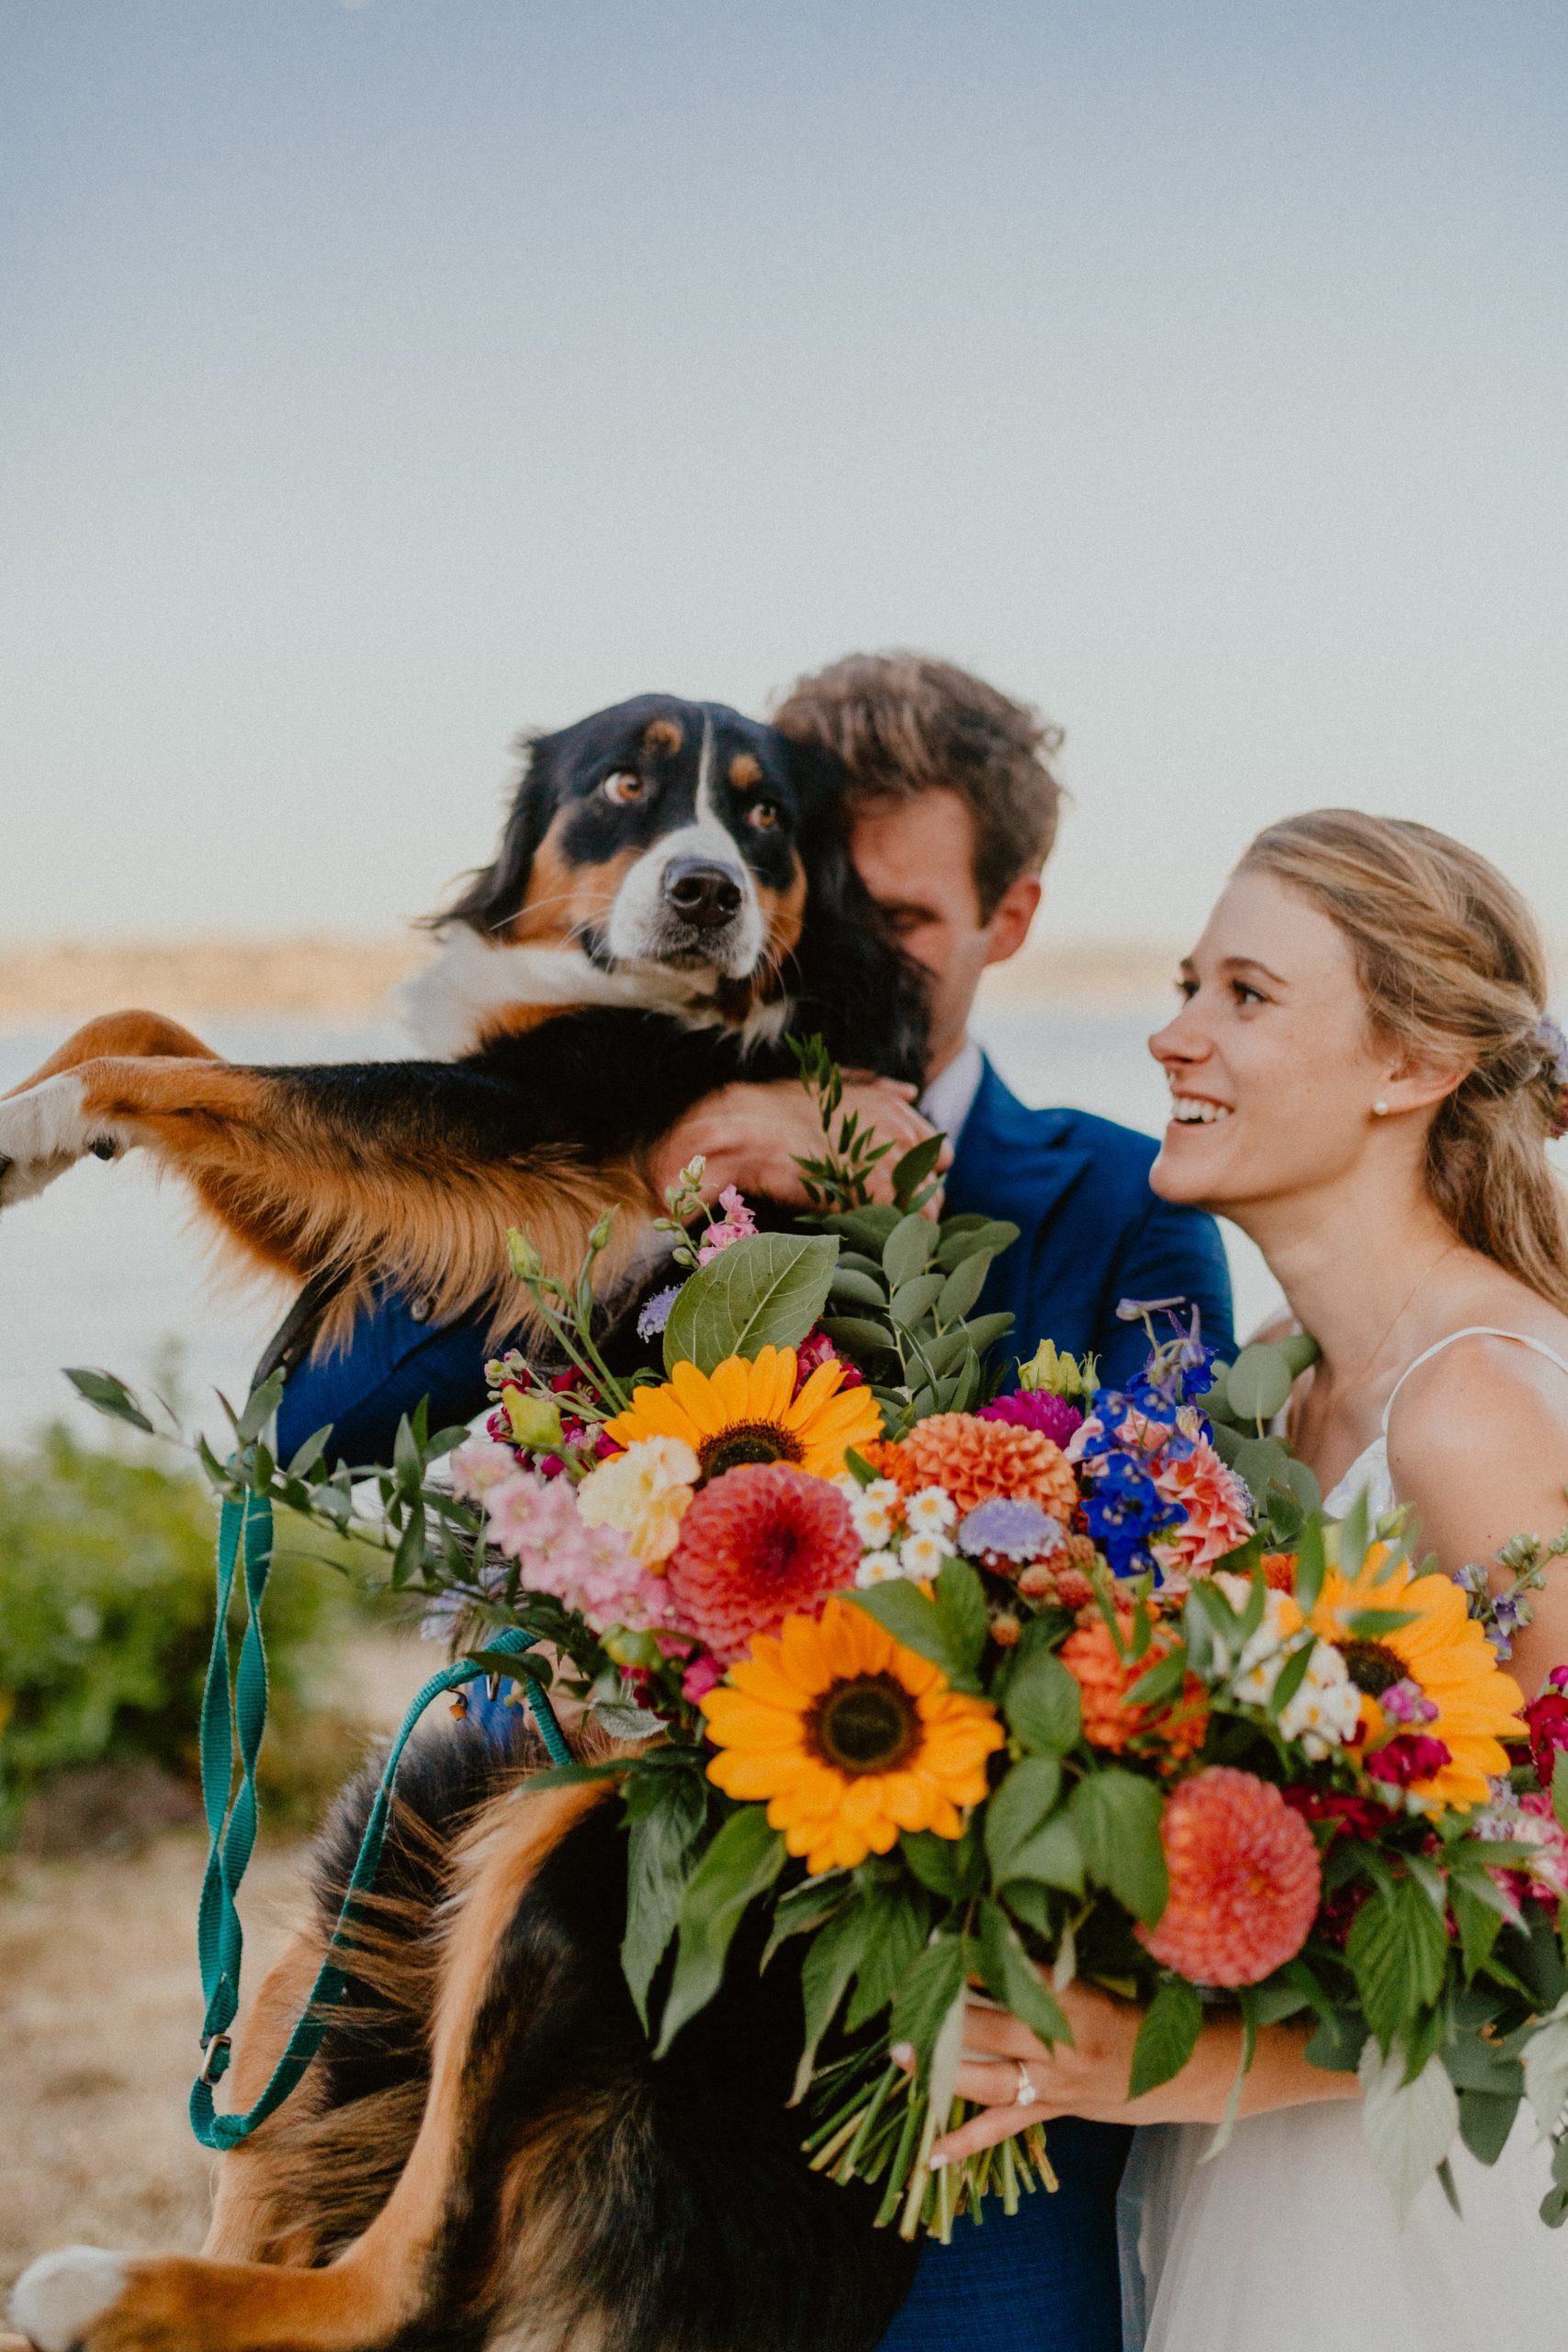 Bride and Groom celebrate with their dog after saying vows in backyard elopement wedding in Washington State outdoor wedding | Washington State Elopement Photographer, Seattle Elopement Photographer, Newlywed Elopement Photographer, Quarantine Wedding Elopement Inspiration | chelseaabril.com